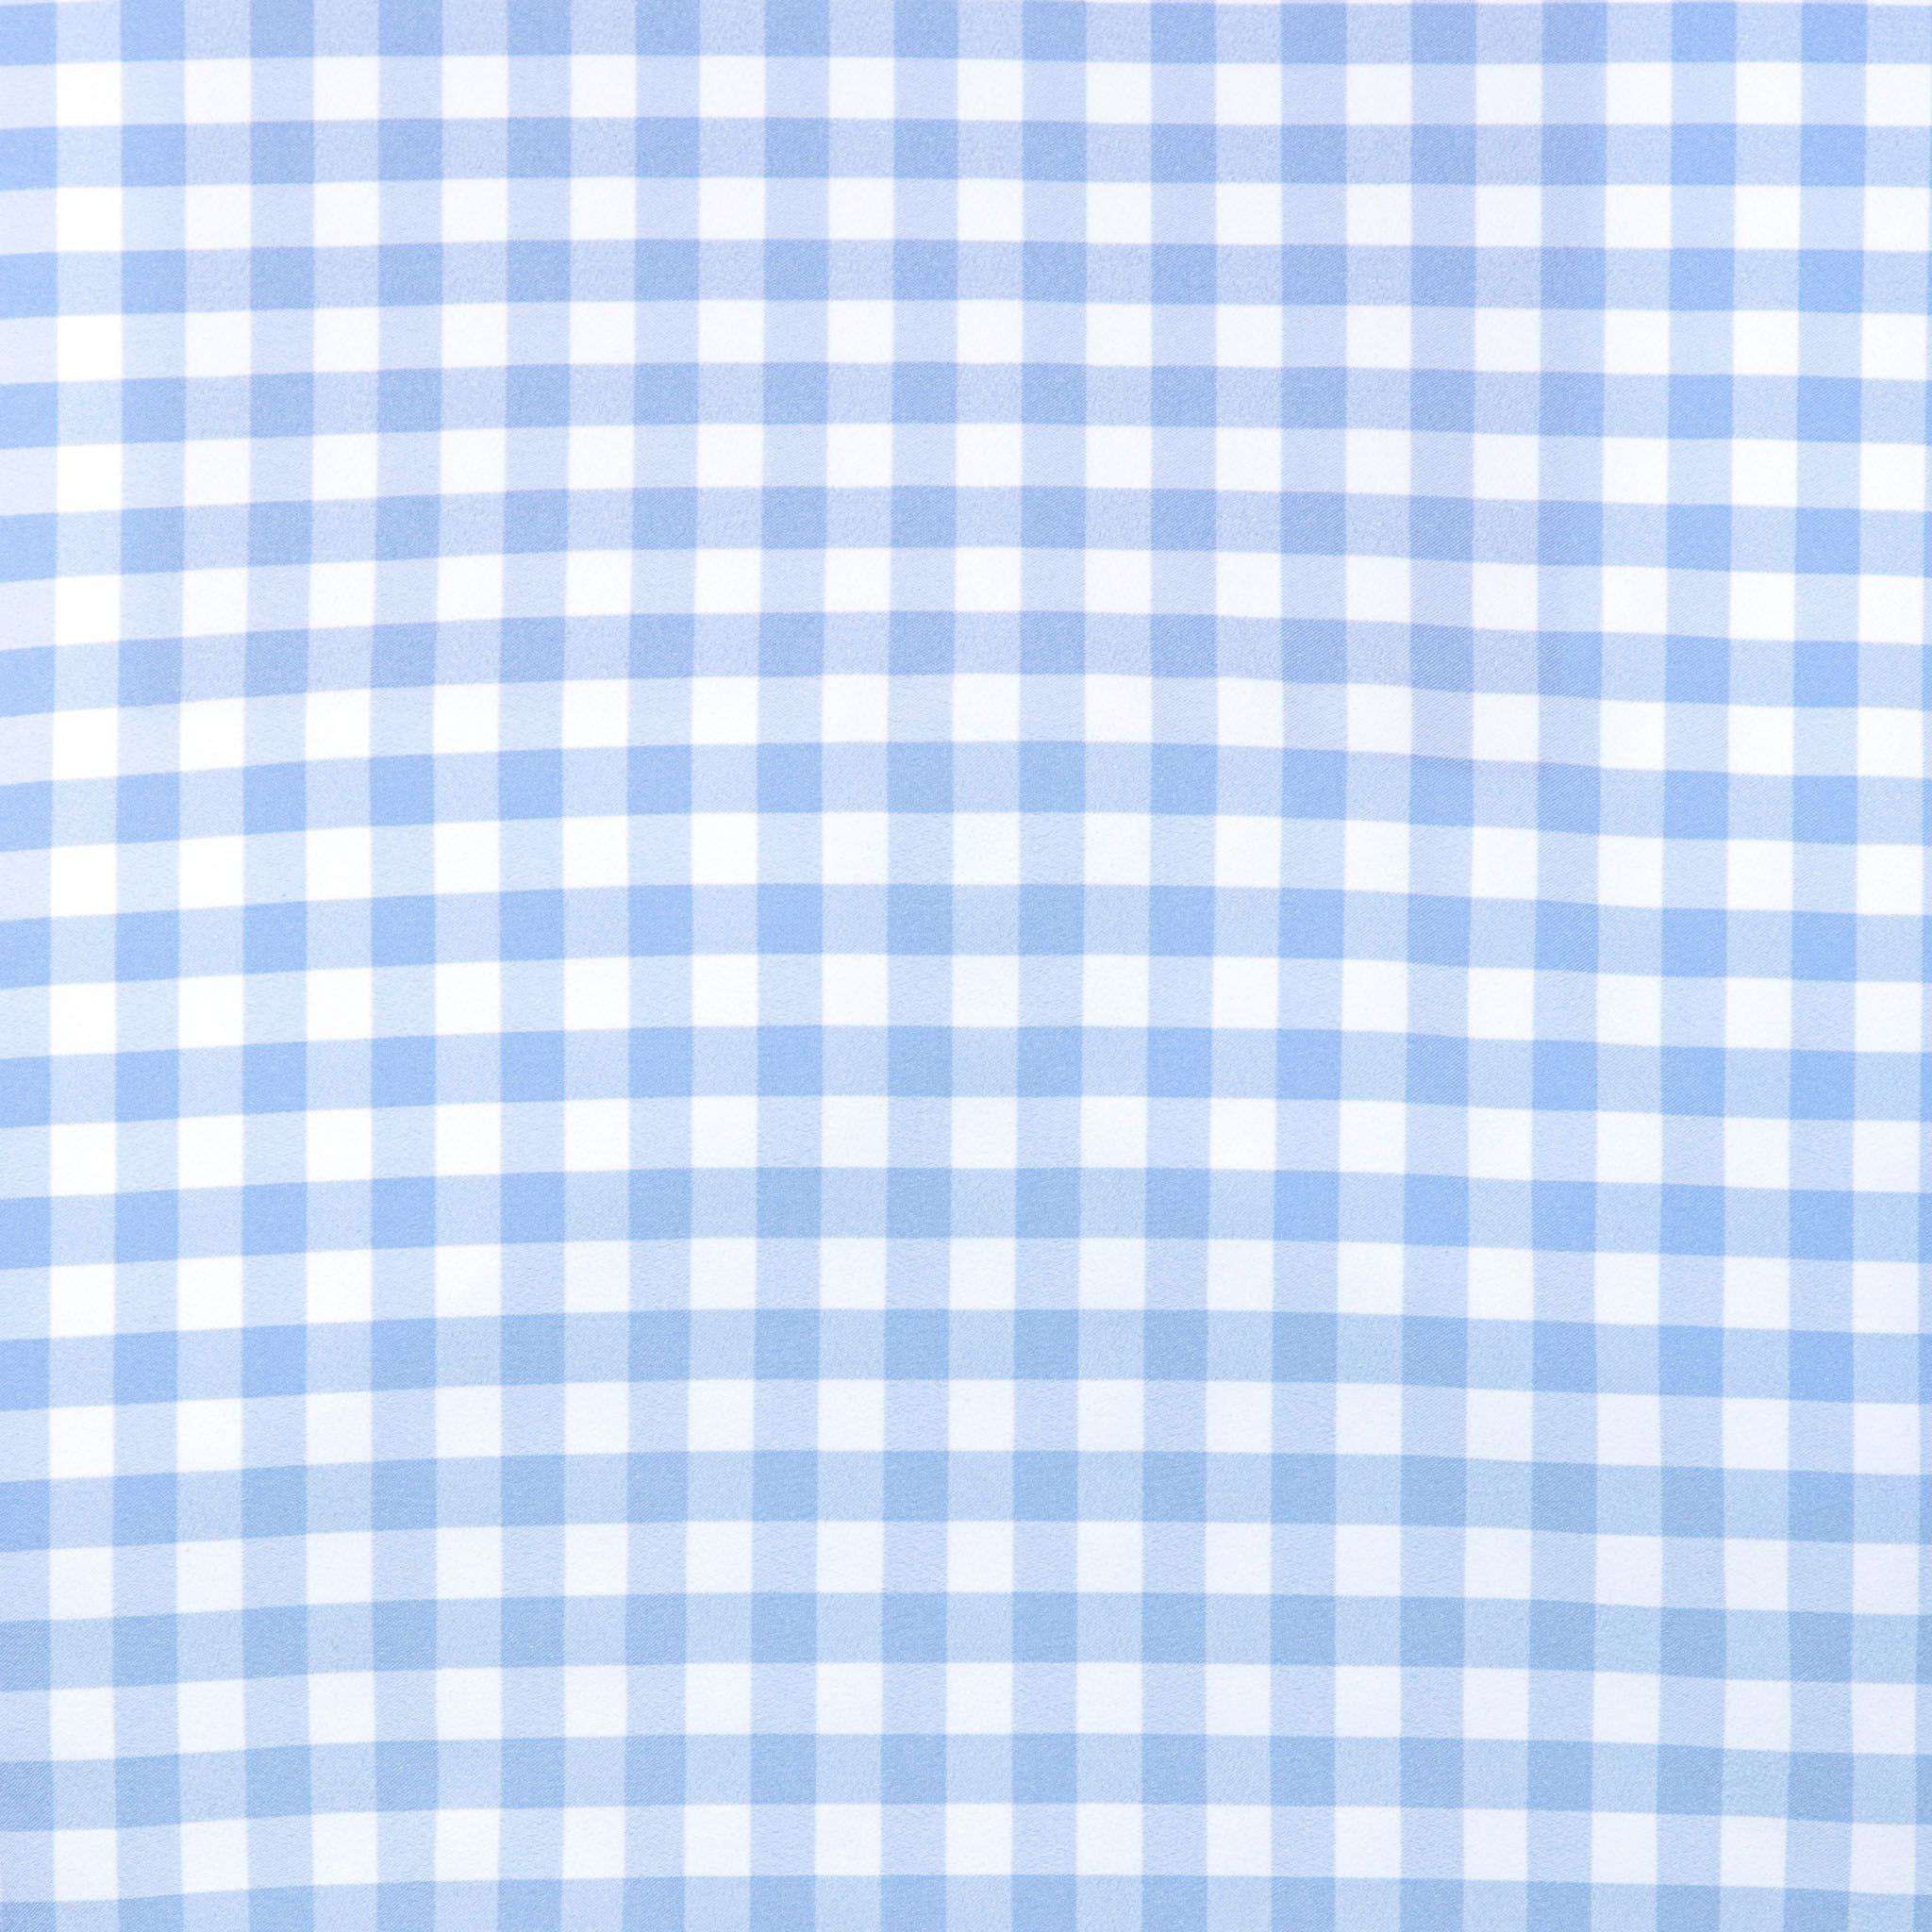 The "Hampton" Button Down in Light Blue Large Gingham by Mizzen + Main - Country Club Prep